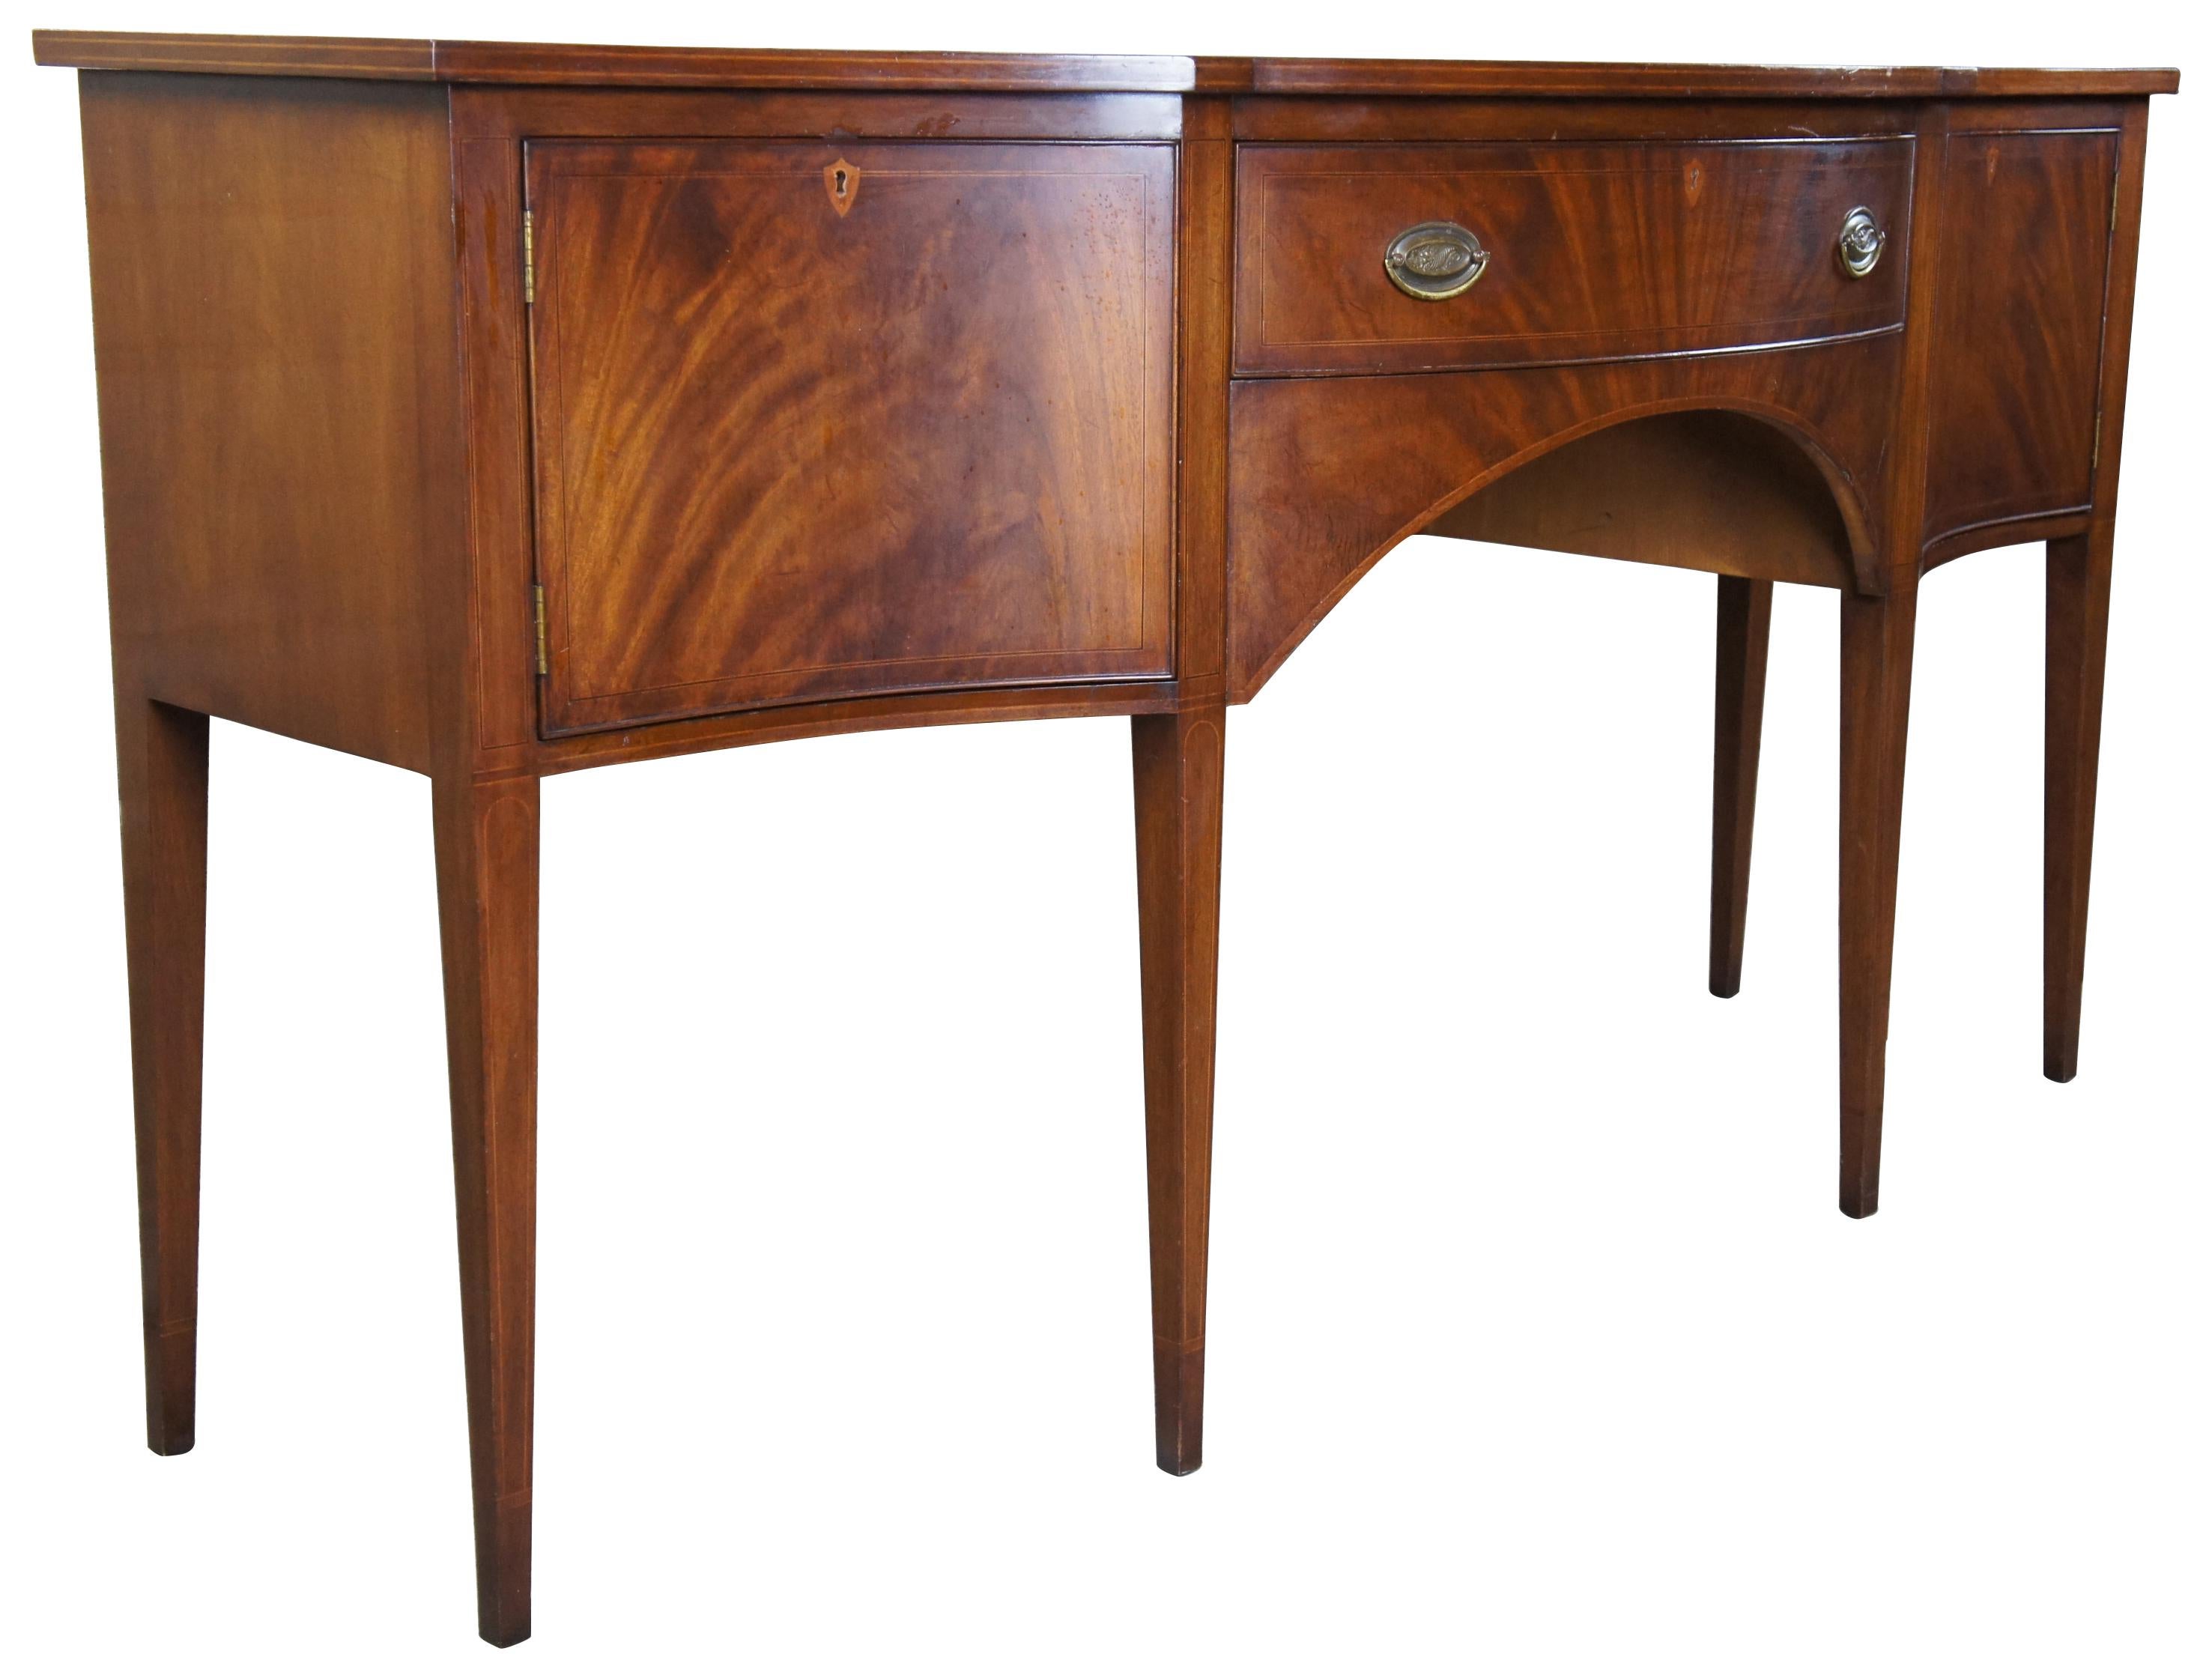 Mid-20th century sideboard by Biggs Furniture Company of Richmond Virginia. Made from flamed mahogany with a contoured bow front over a central drawer and outer cabinets. Features inlay, square tapered legs and brass hardware. Includes a silverware